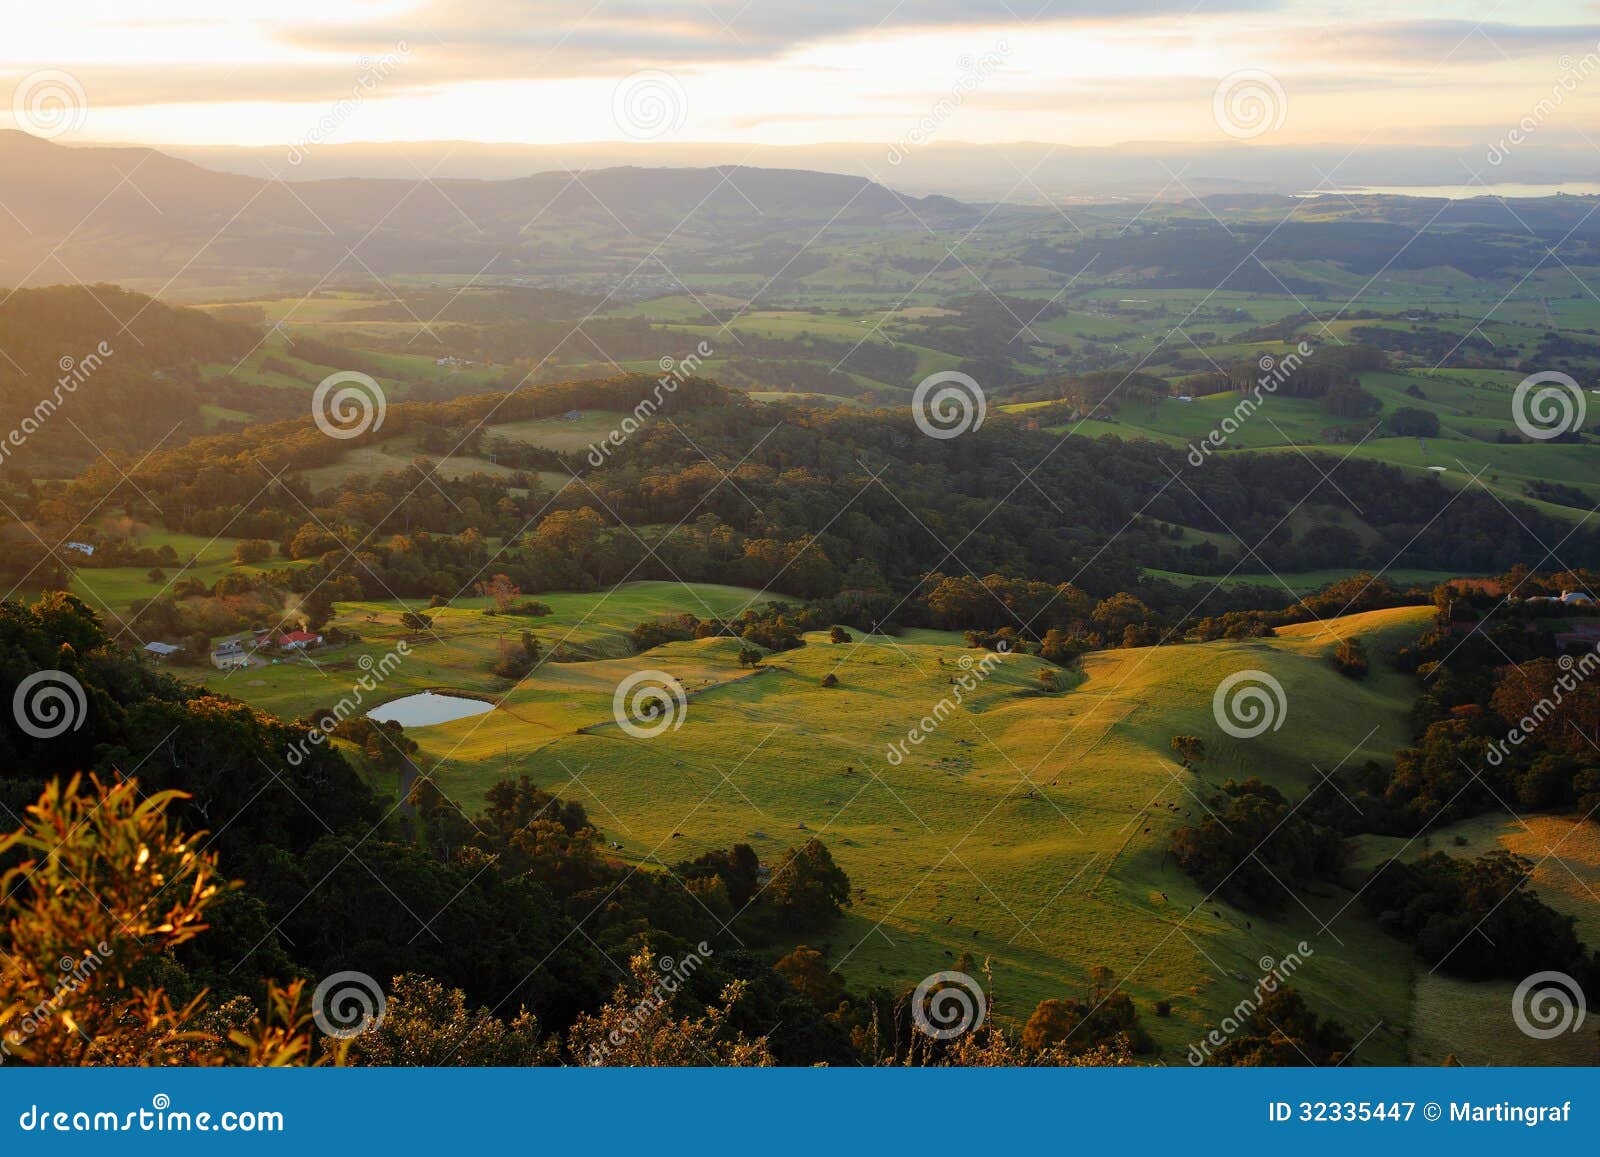 vast view hilly landscape at coastal region in australia by sunset